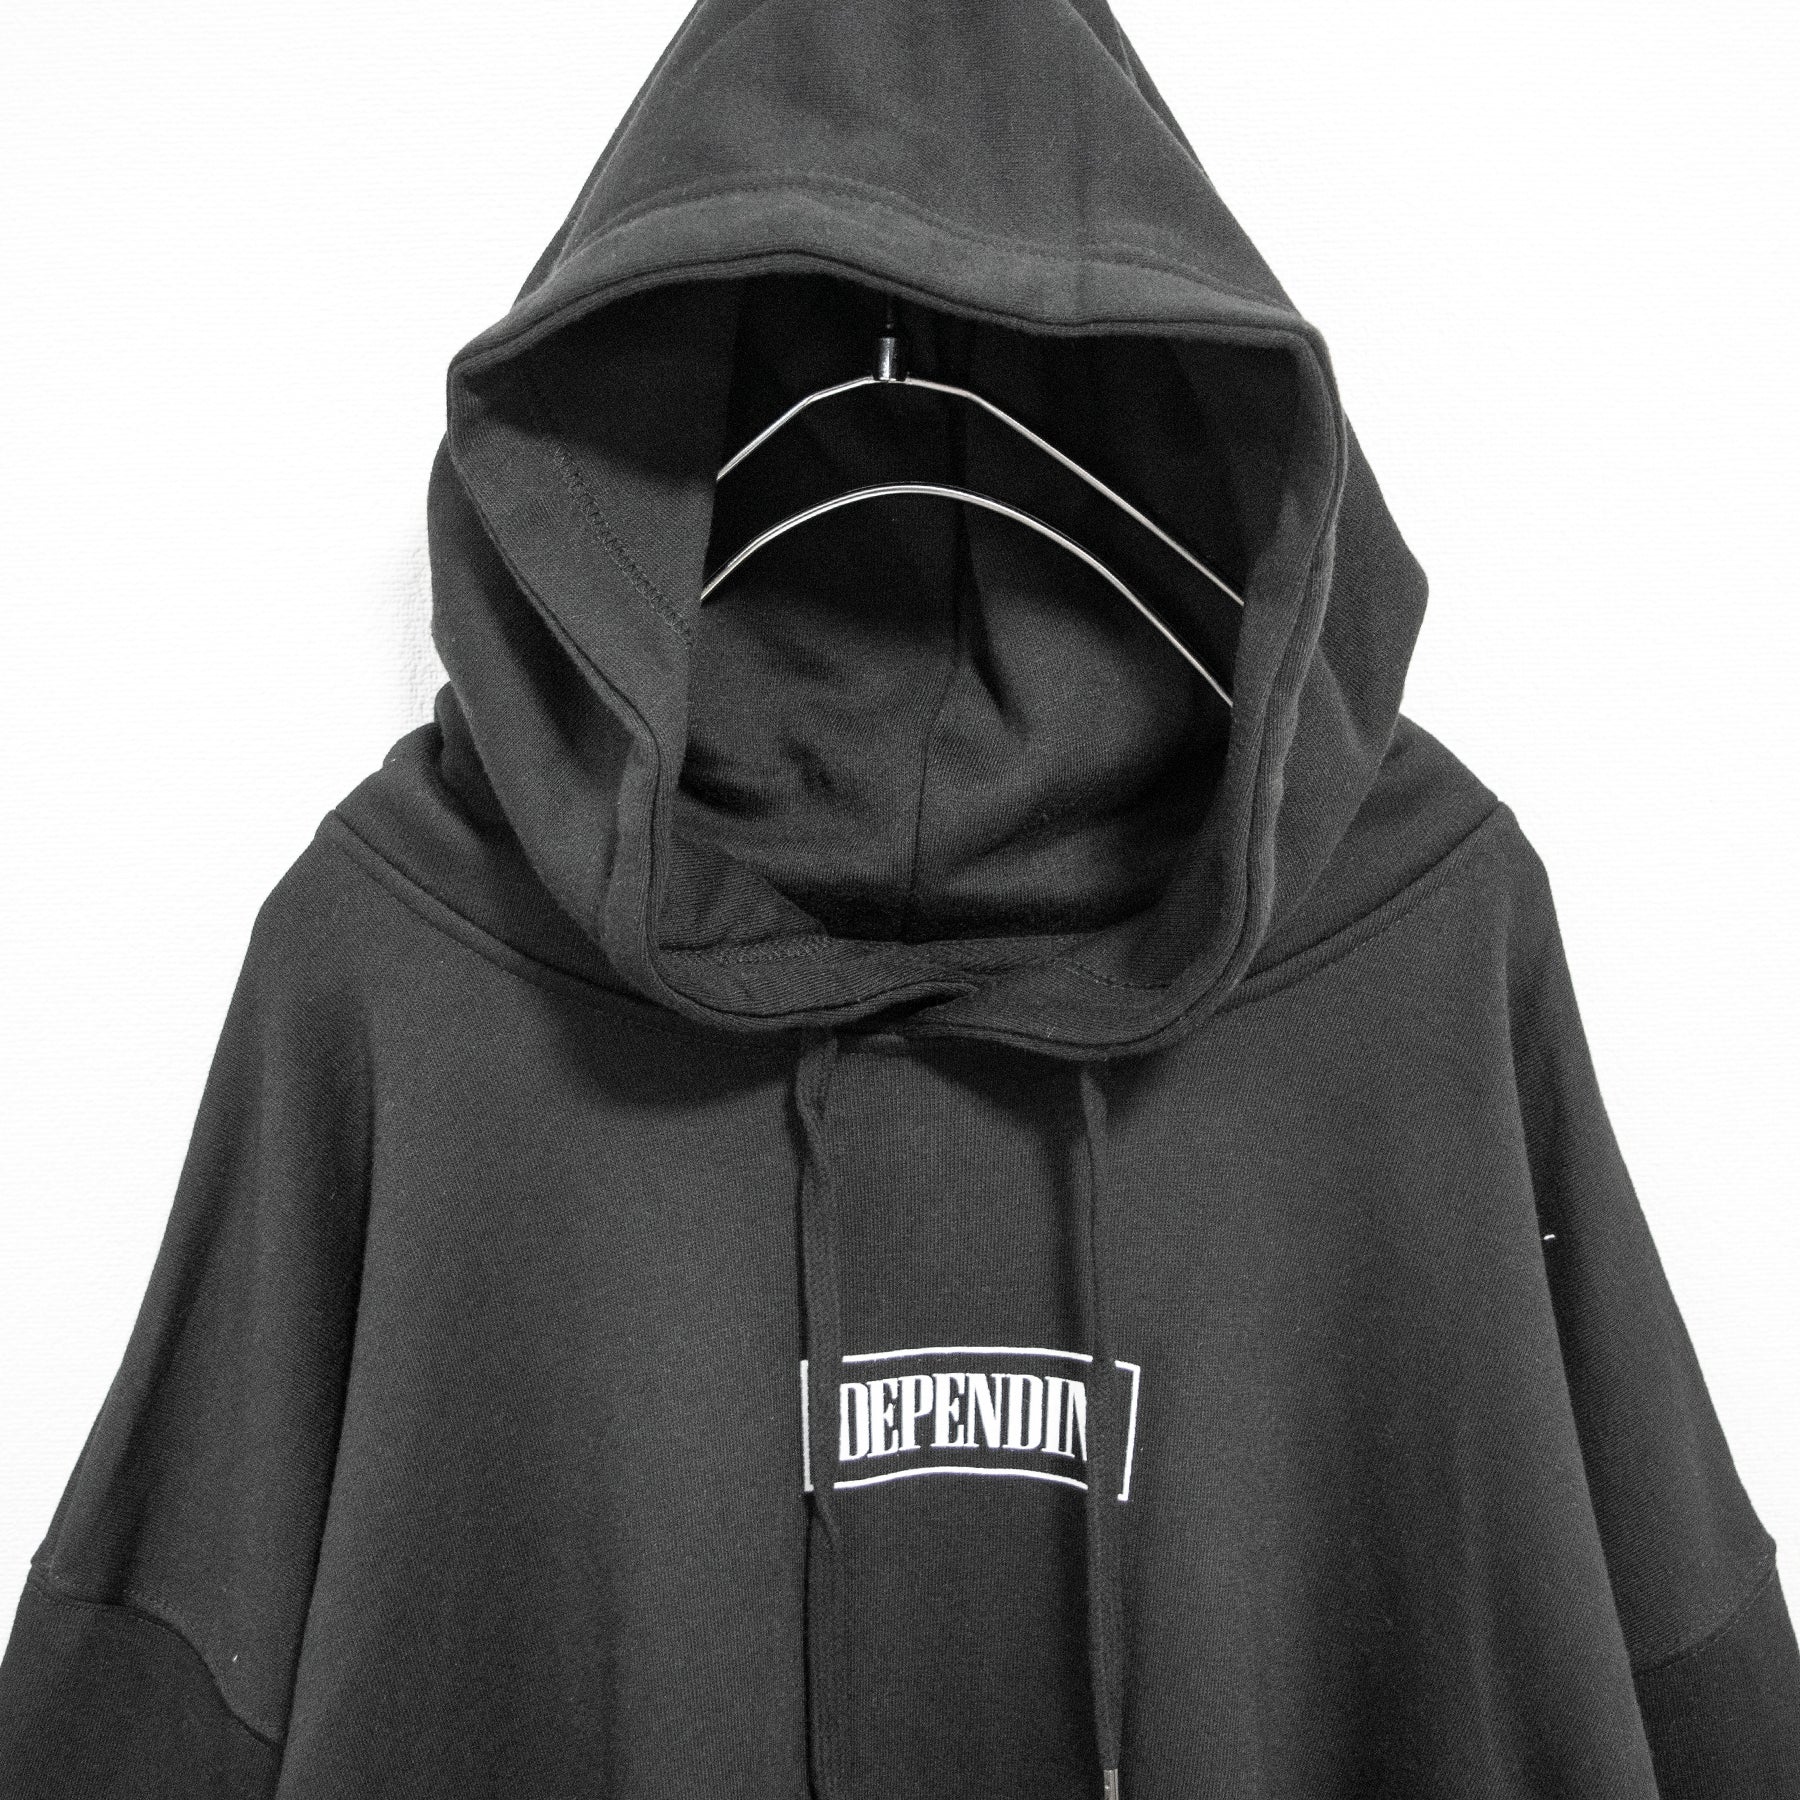 BIG Roll Logo Pullover Hoodie (3 color) - YOUAREMYPOISON